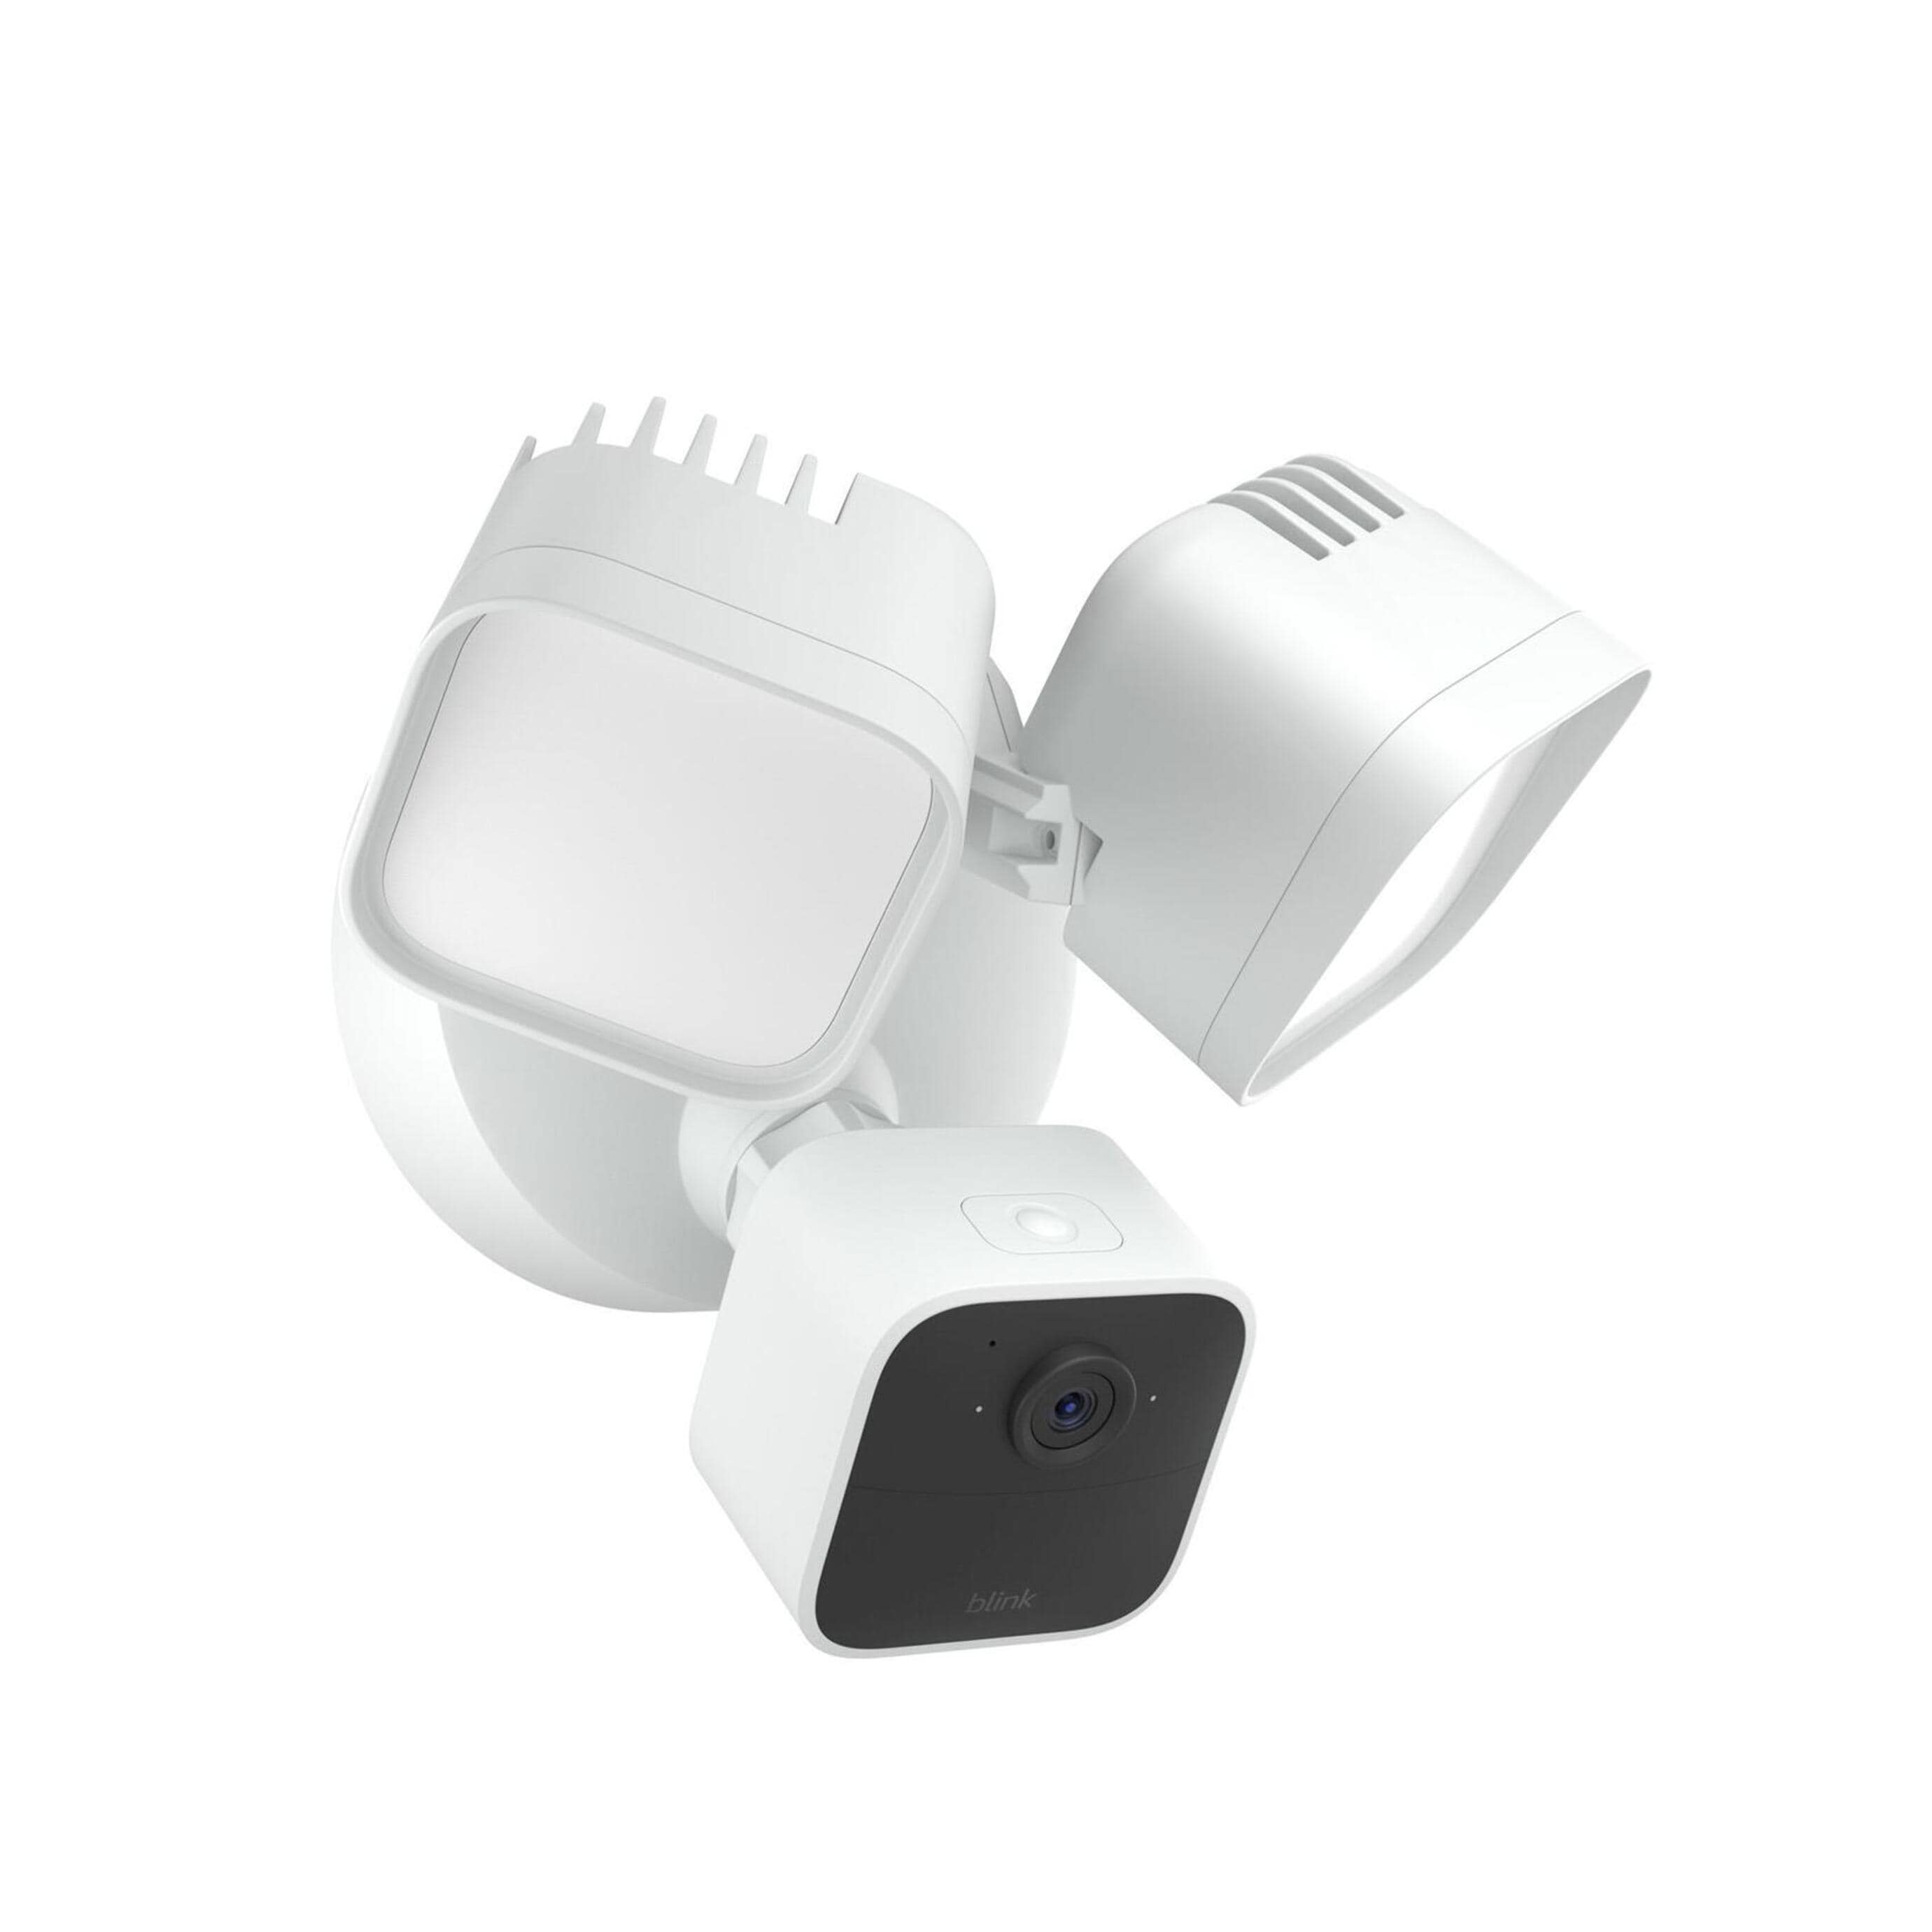 Blink Wired Floodlight Camera - Smart Security Camera - 2600